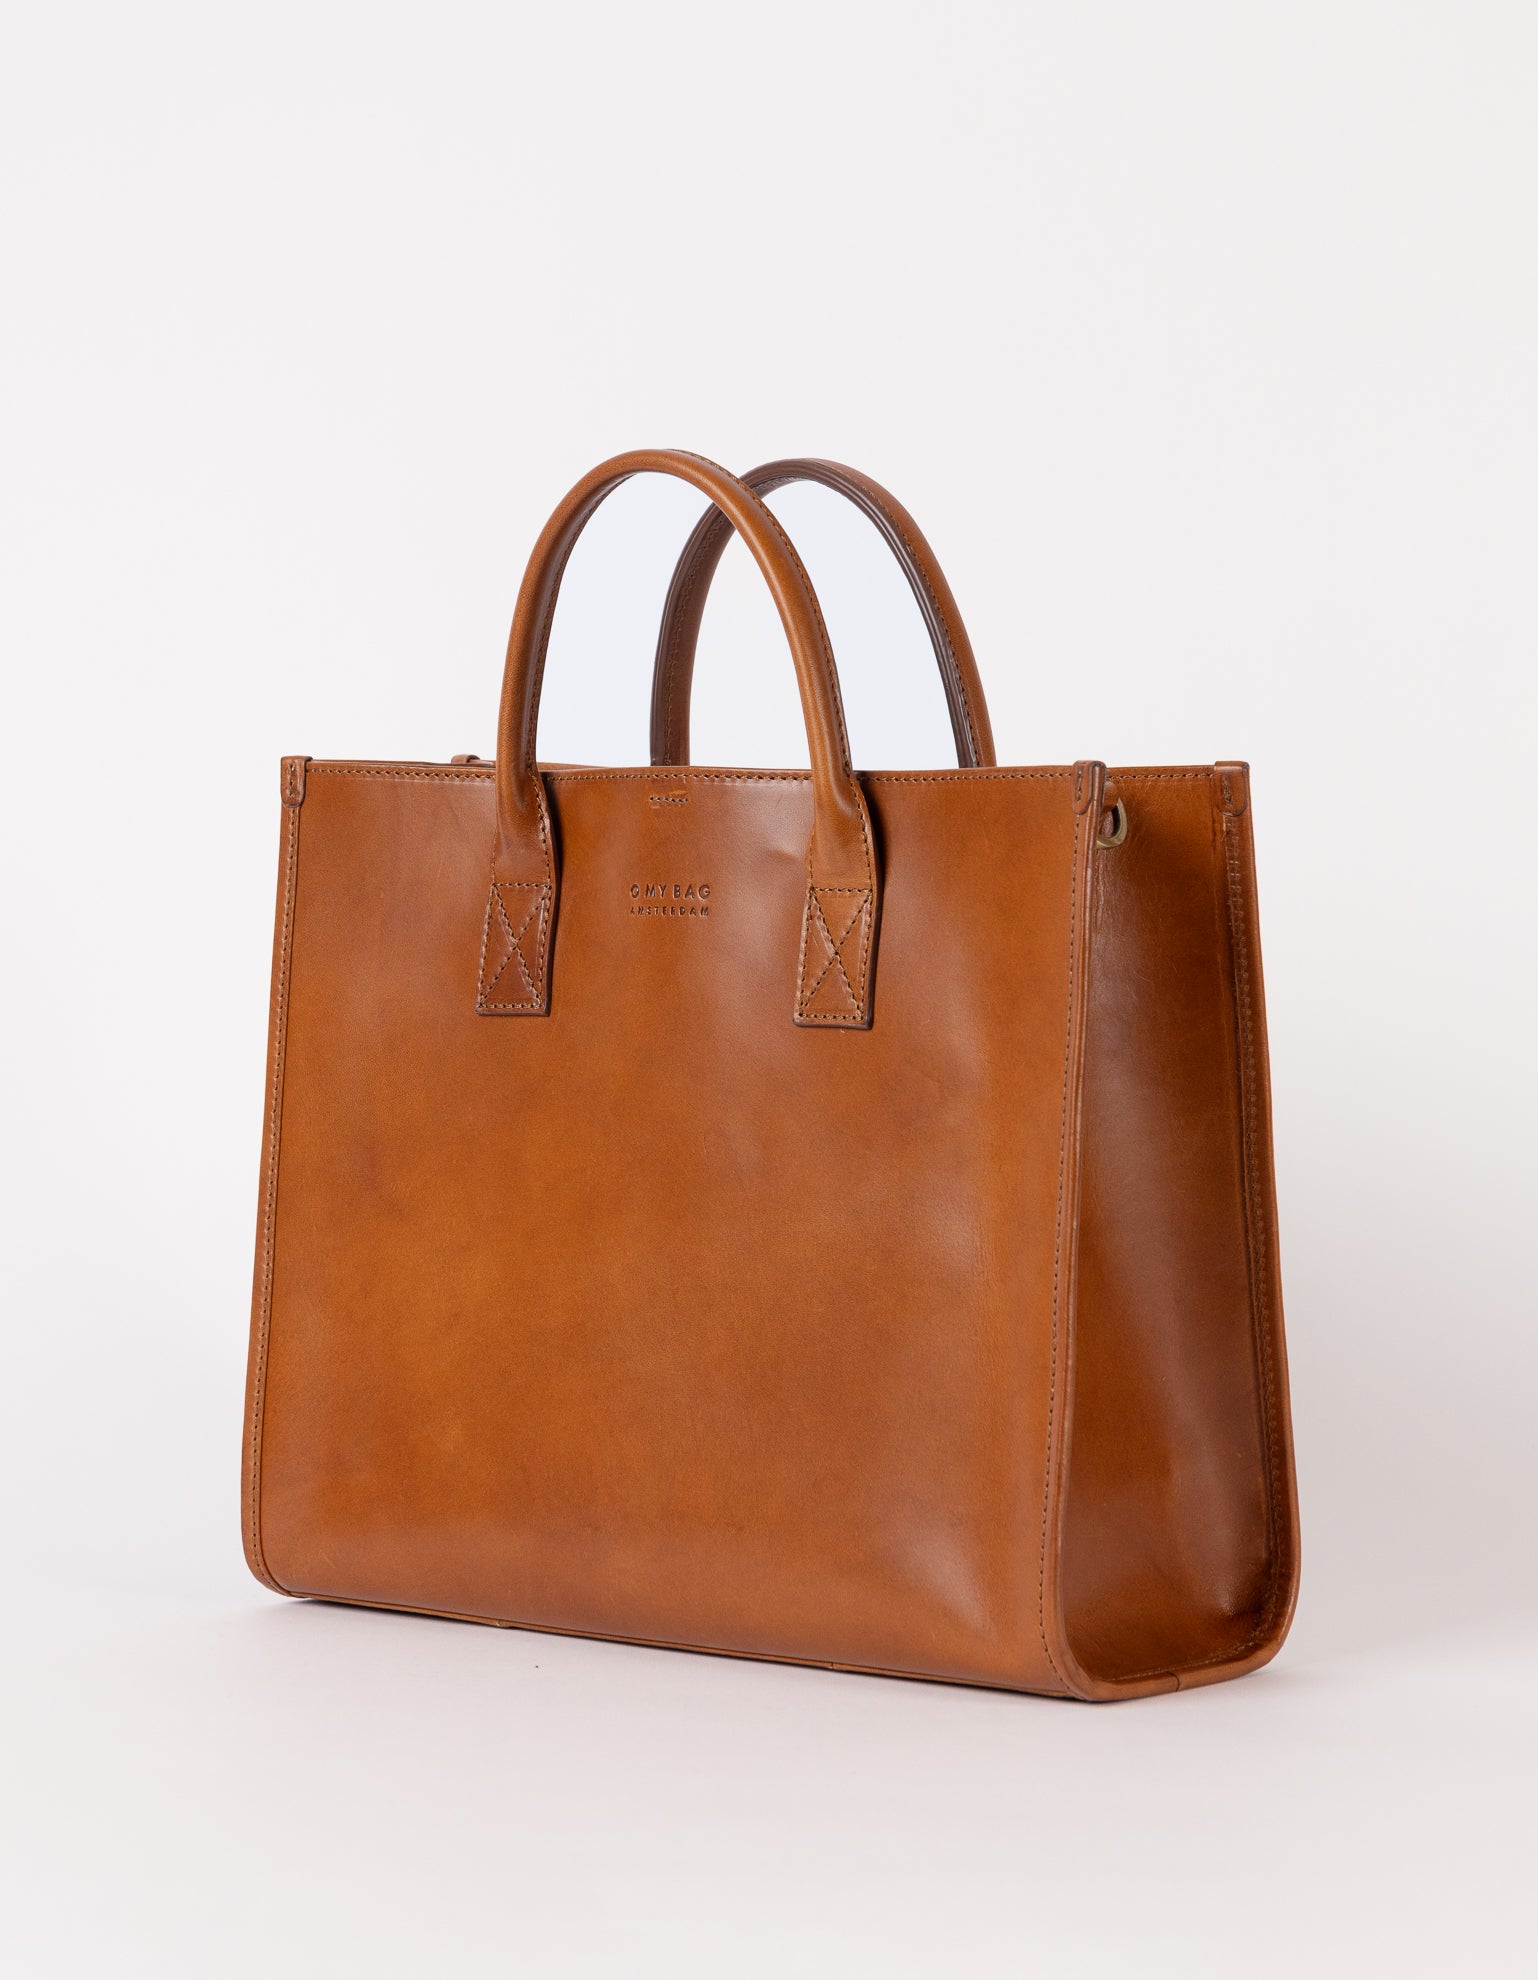 Rectangle shaped leather tote bag - side product image